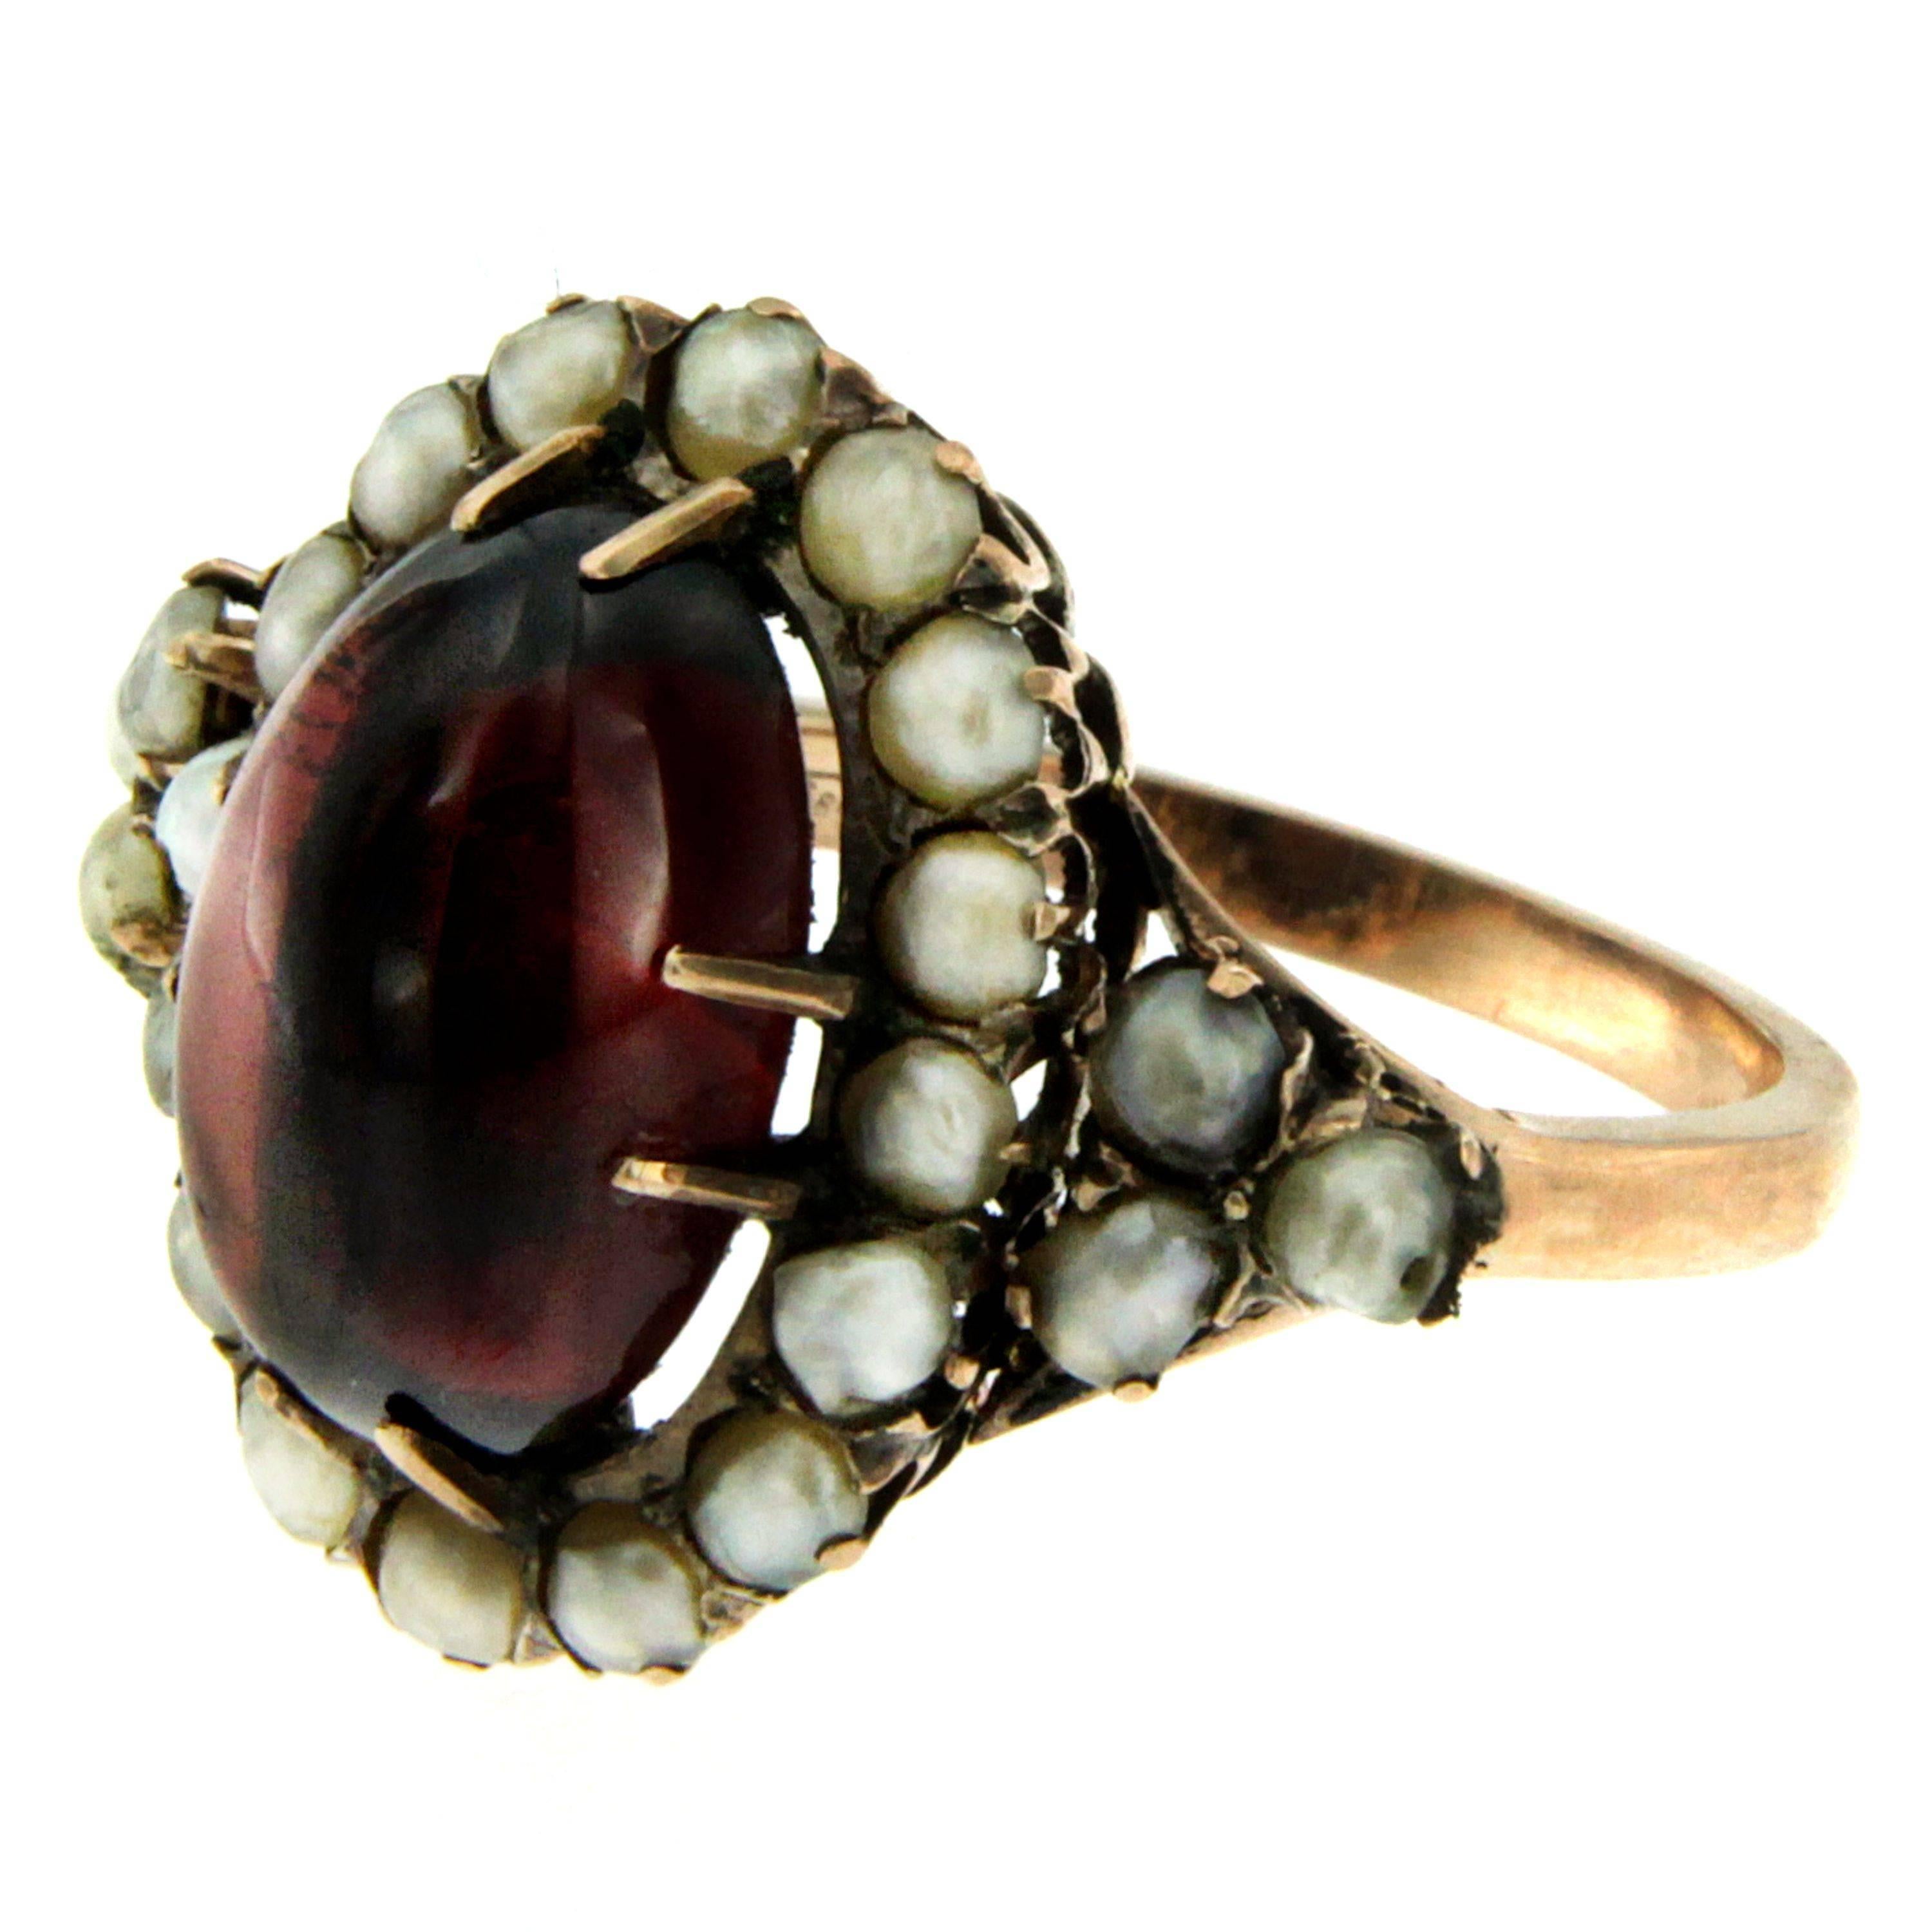 Victorian Garnet Bashra Pearl Halo Ring. The Garnet measures 15.29mm x 11.27mm  and is flanked by small bashra natural pearls.
Hand crafted in 12k rose gold. Circa 1890

CONDITION: Pre-owned - Excellent 
METAL: 18k rose Gold
GEM STONE: Garnet,